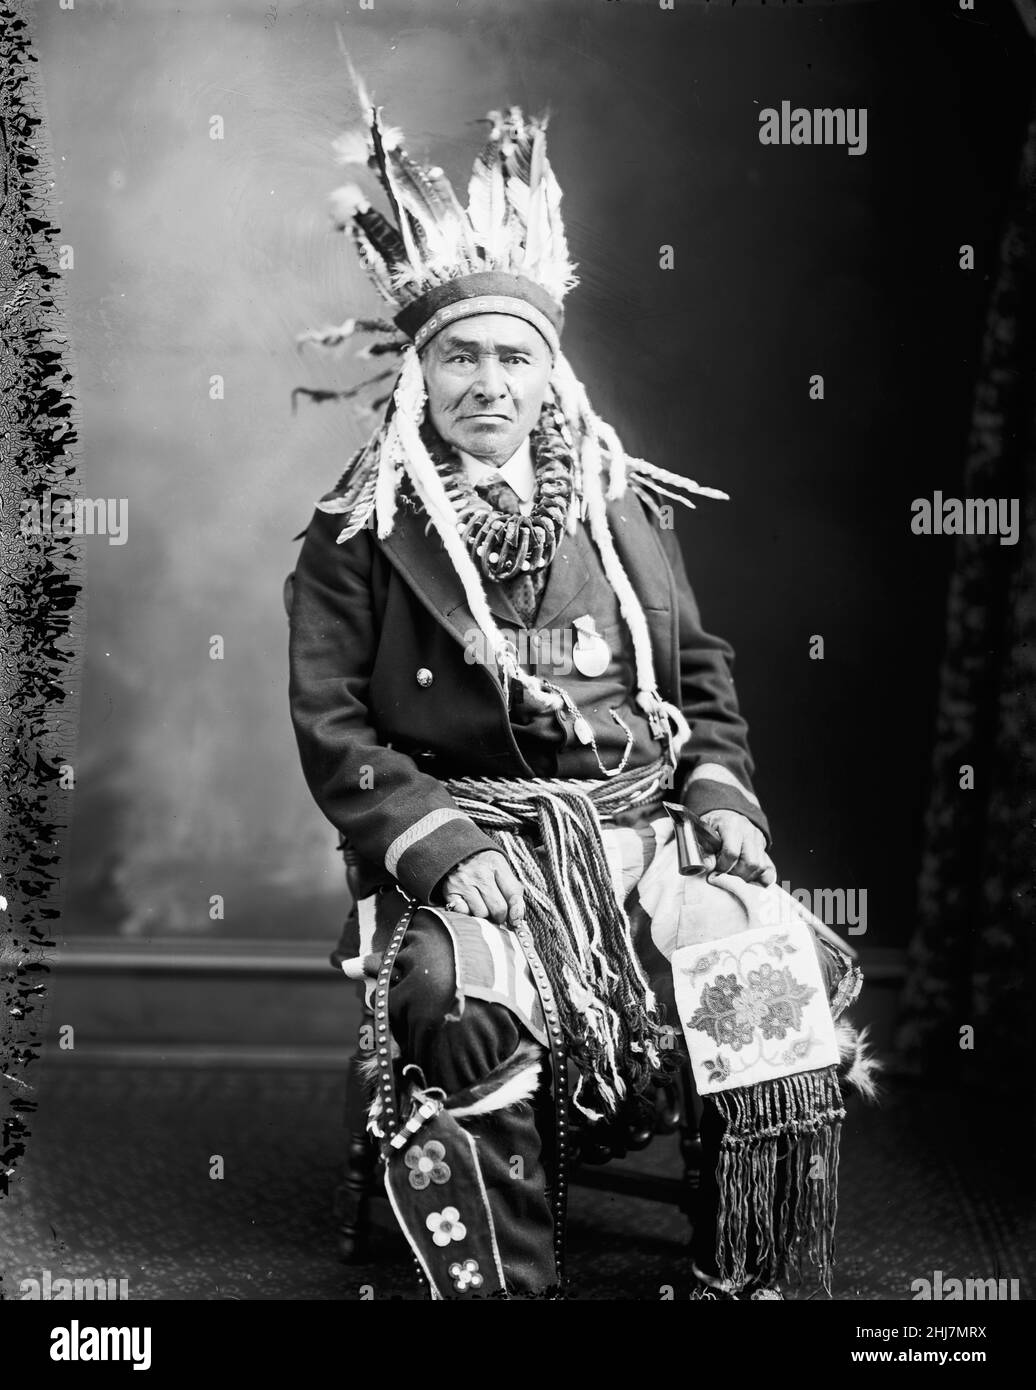 FLATMOUTH, CHIEF - Antique and vintage photo - Native american / Indian / American Indian. Early 1900s. Stock Photo